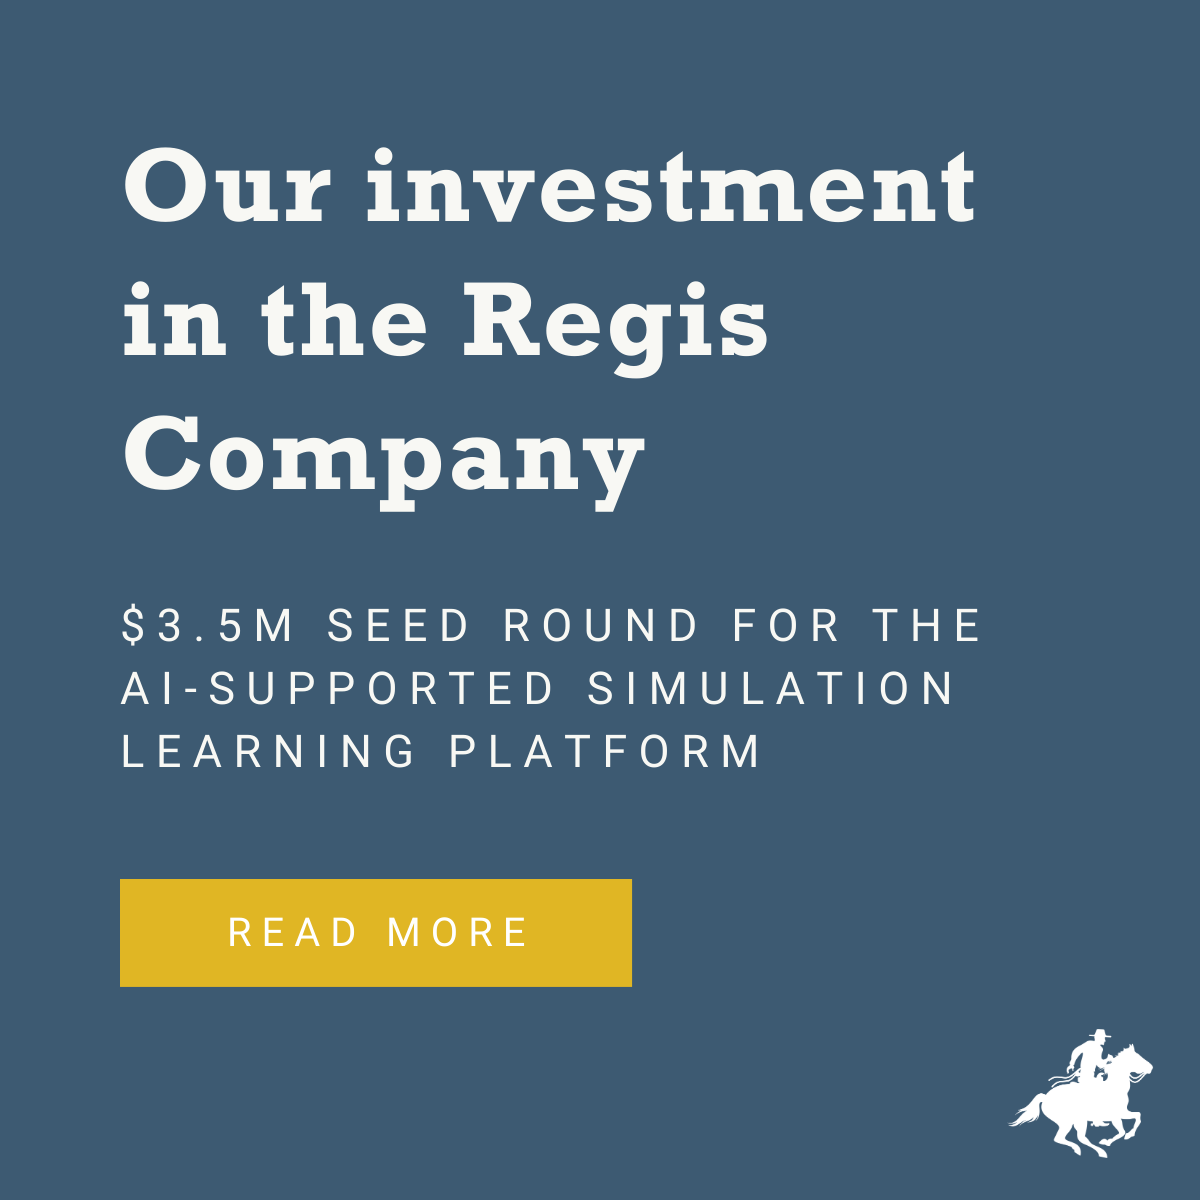 Our latest seed investment in the Regis Company’s AI-Supported Simulation Learning Platform